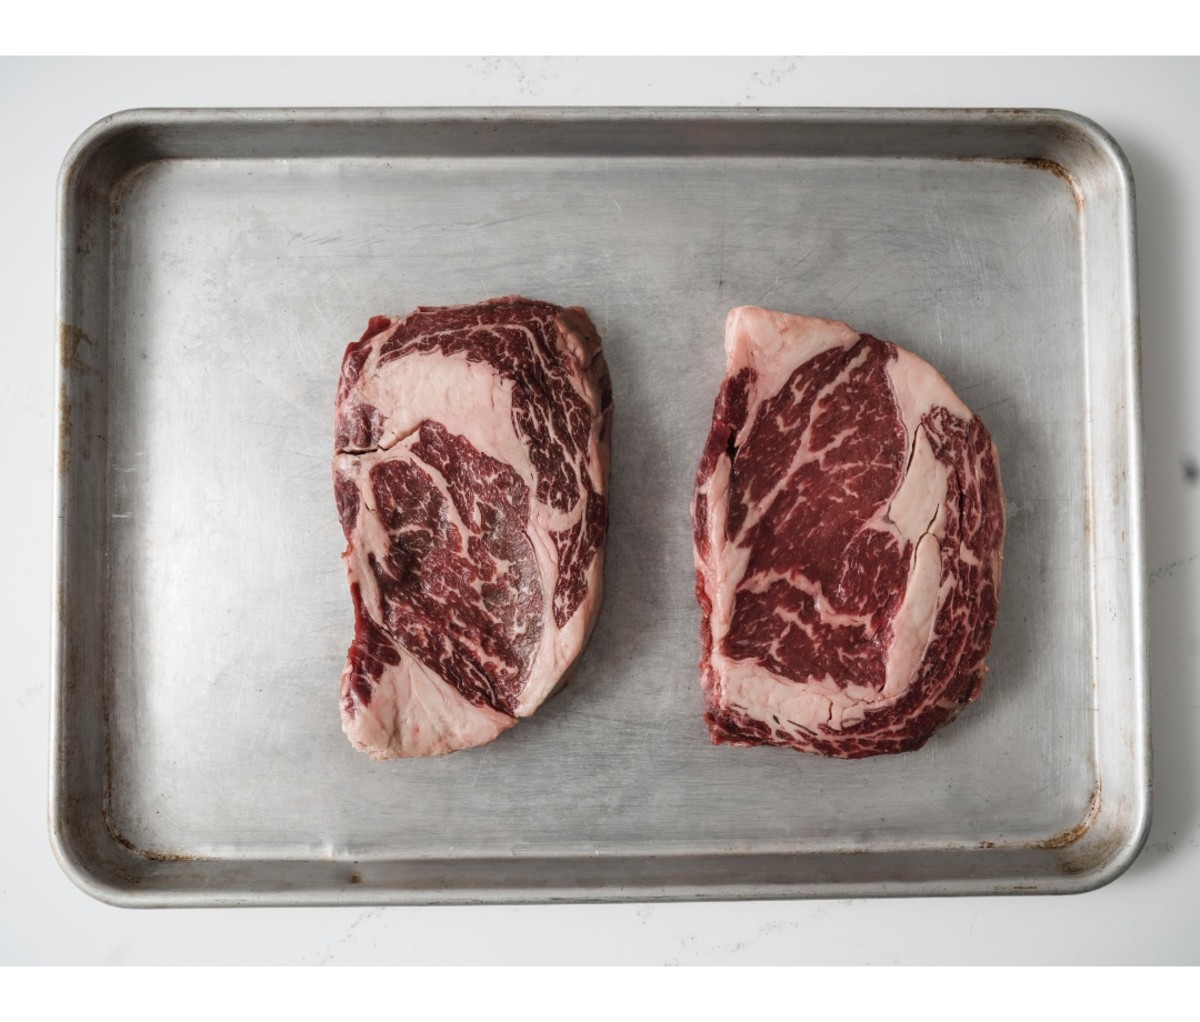 Choose the choicest cuts from these online grass-fed beef suppliers for your Labor Day grill fest.